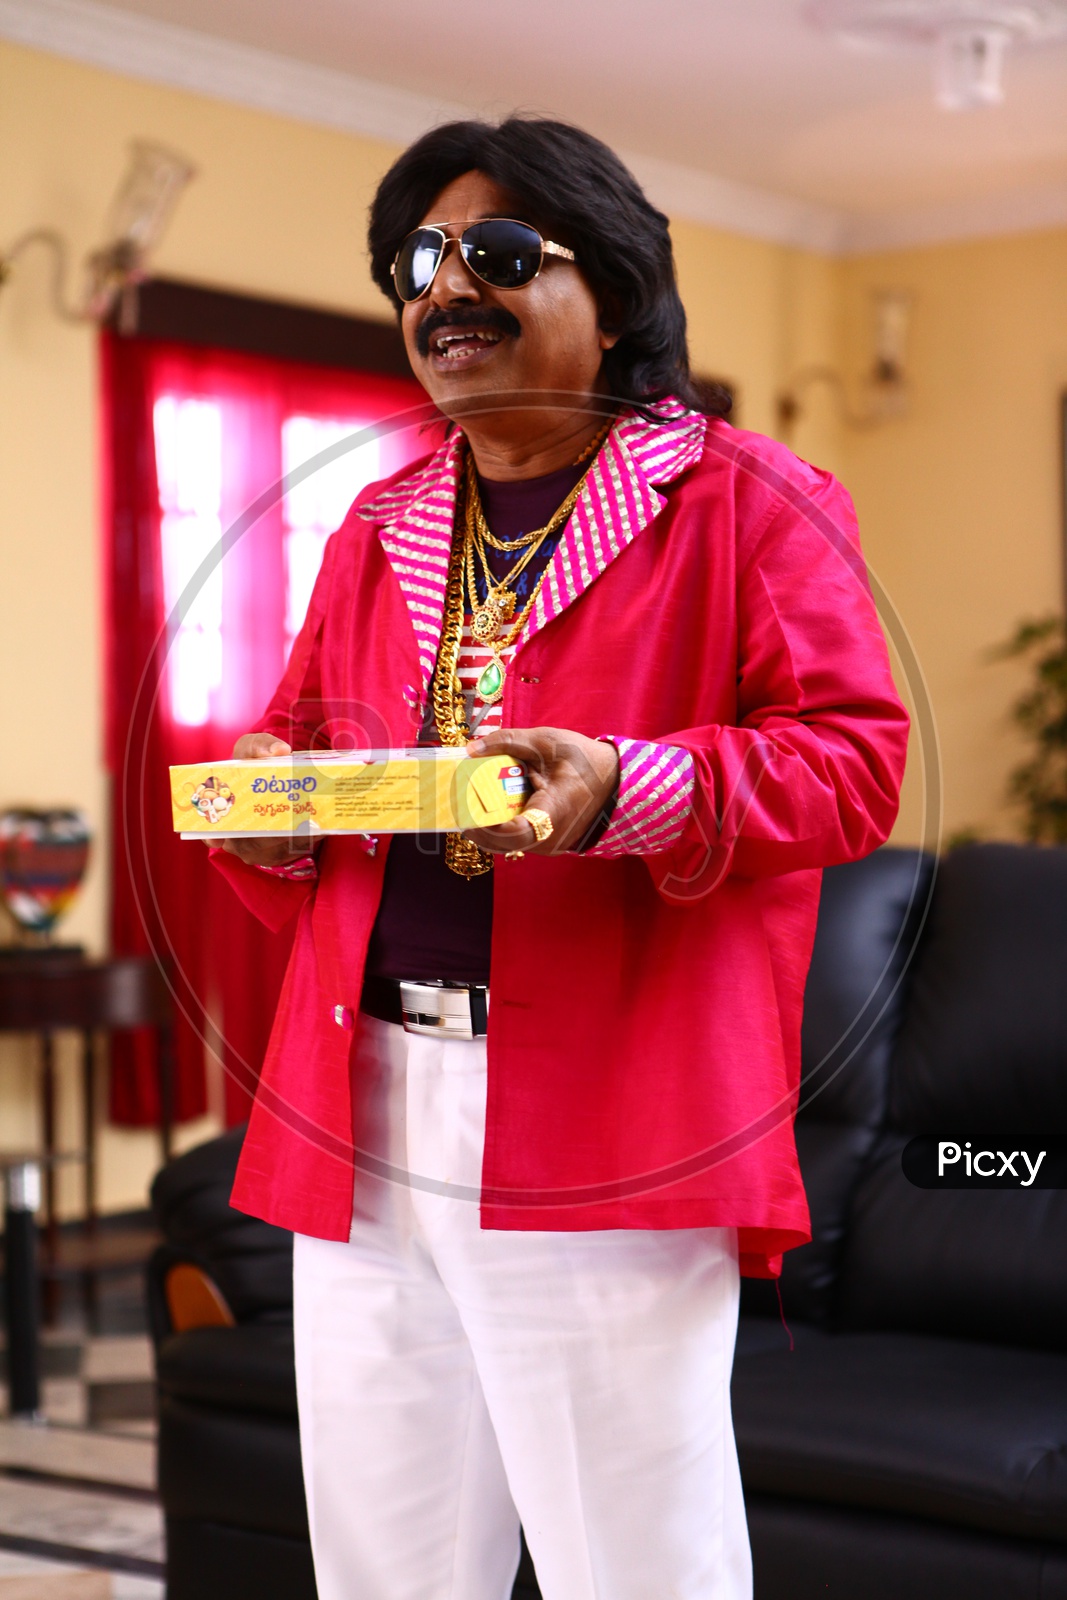 A Man Wearing Gold ornaments And Carrying Sweets Box